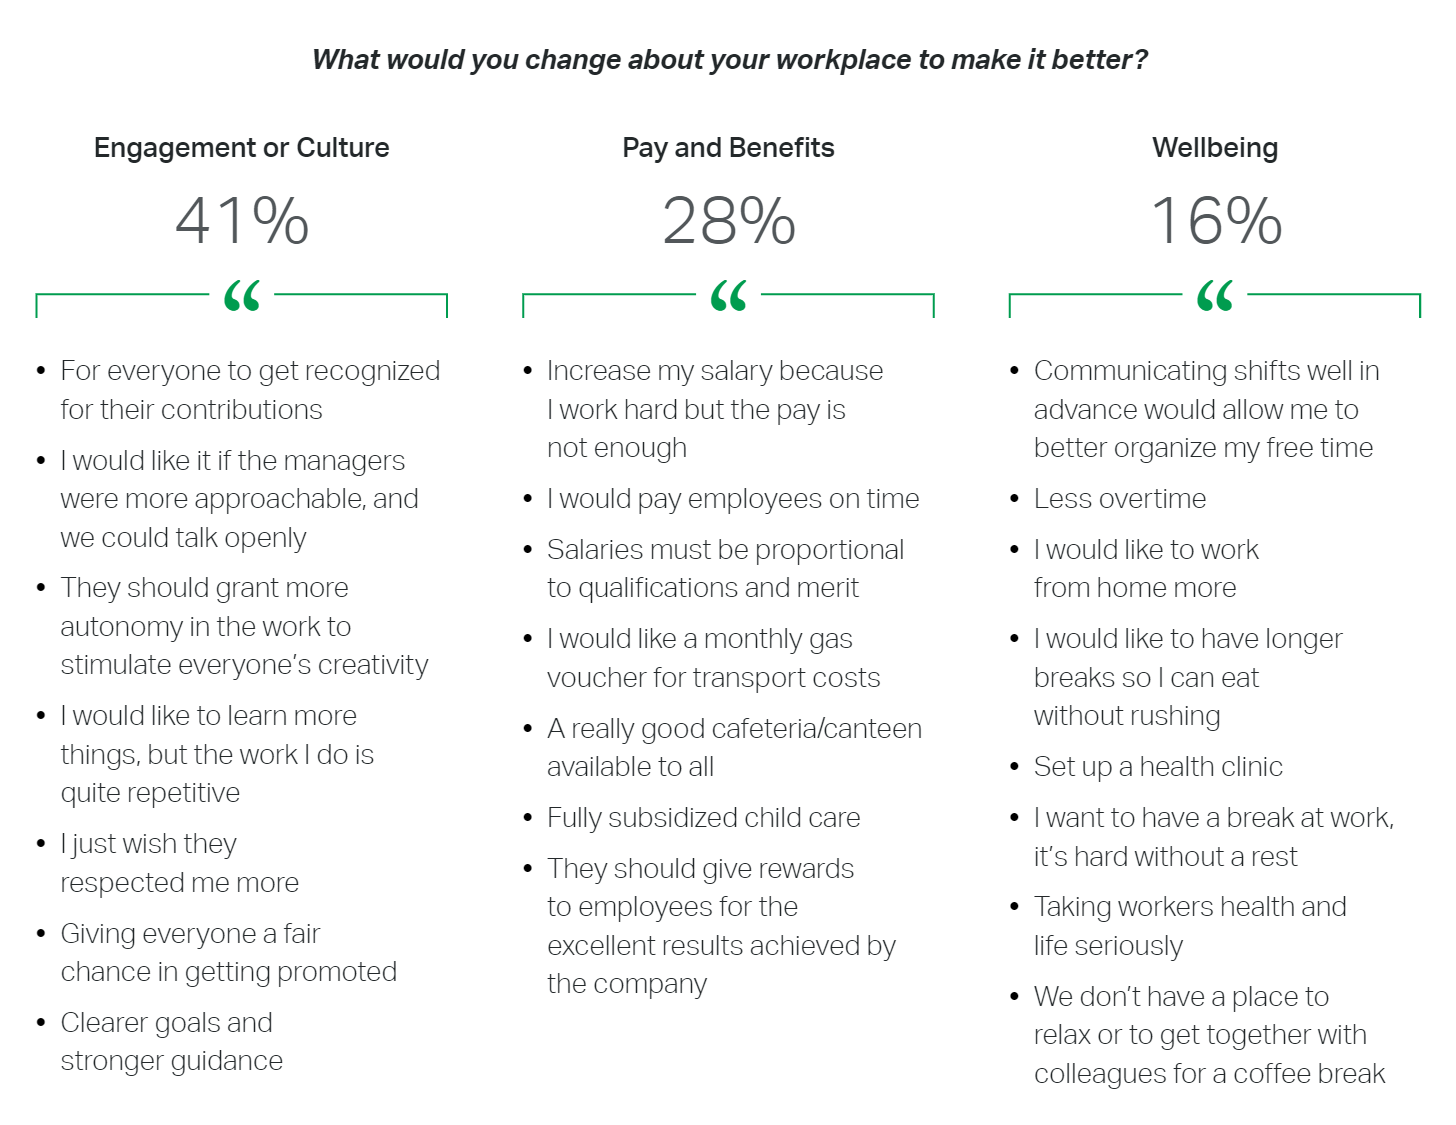 Screen capture of Gallup 2023 Workplace Survey